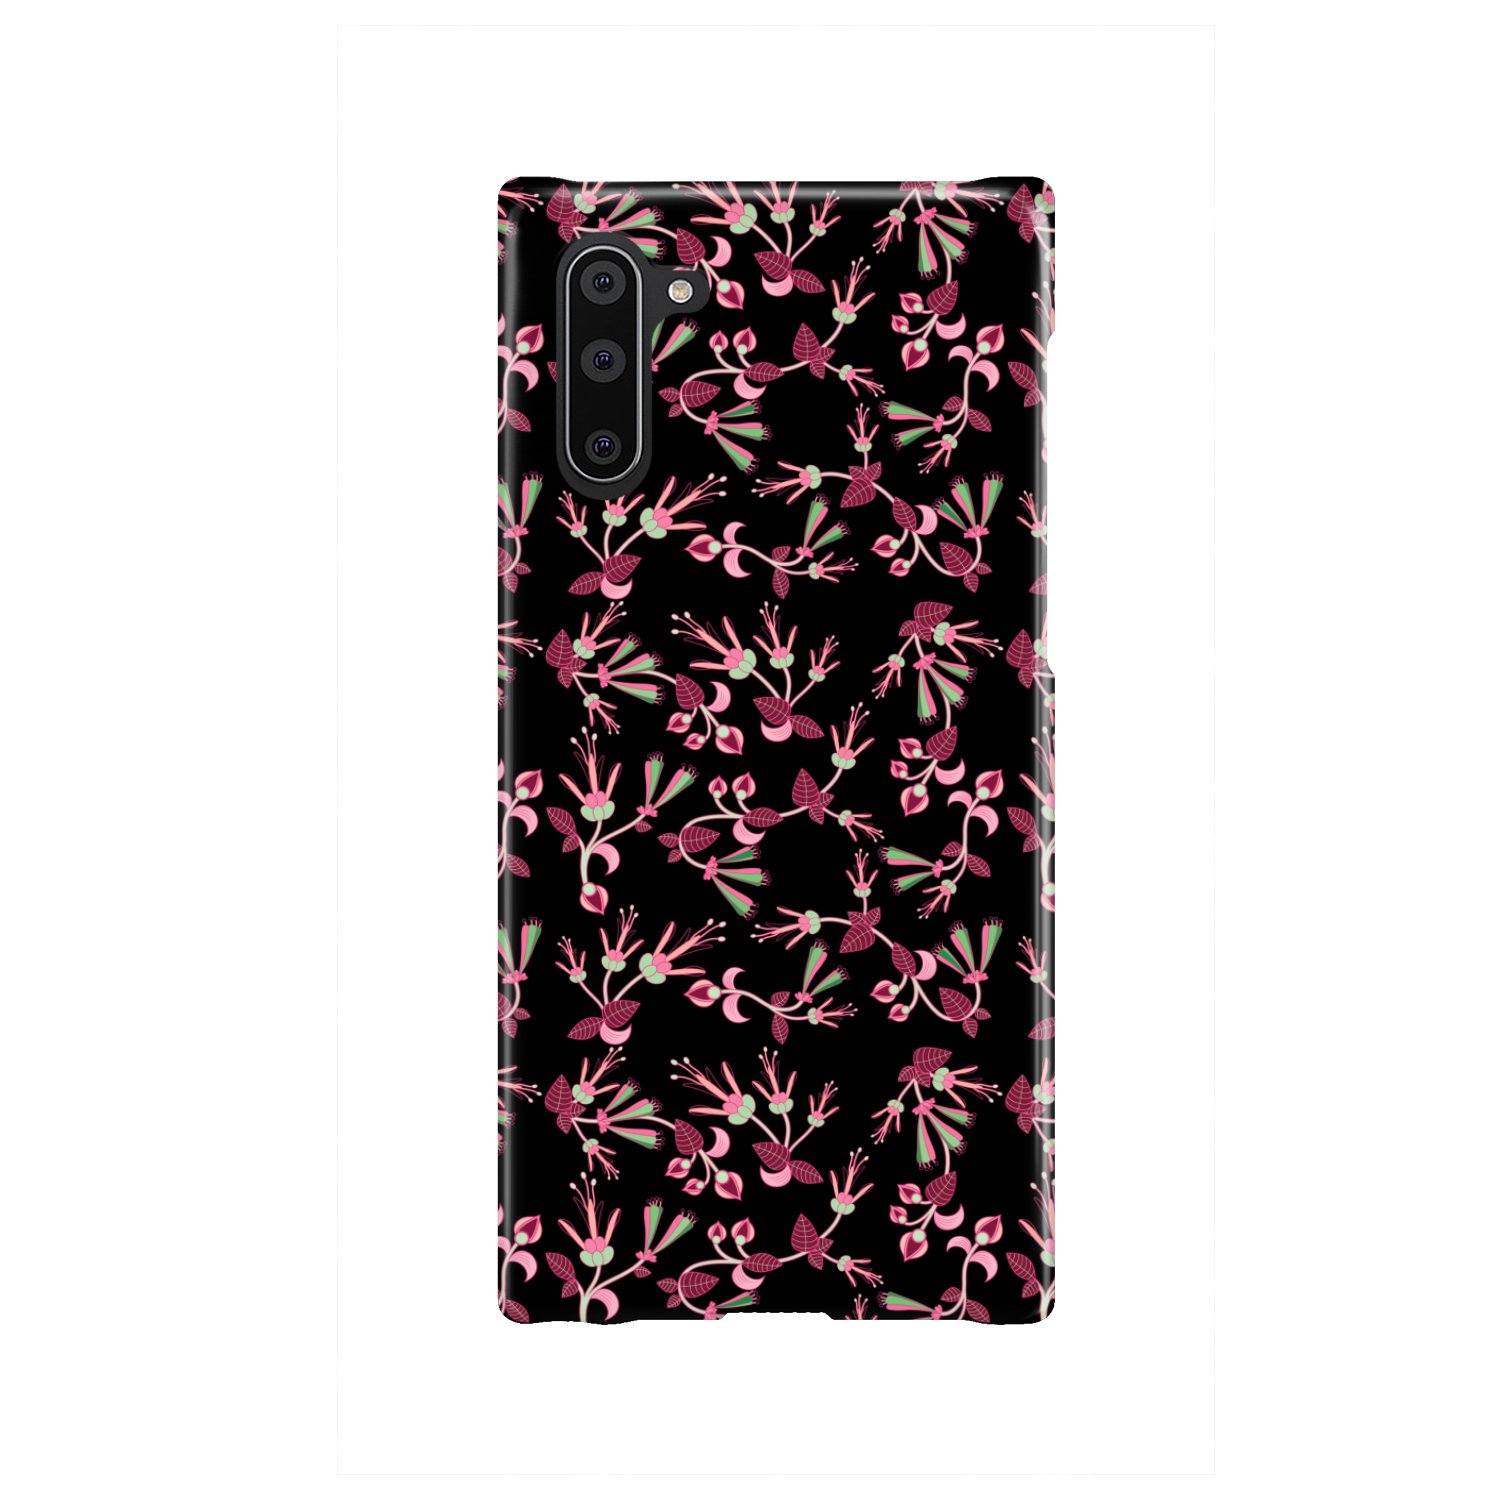 Floral Green Black Phone Case Phone Case wc-fulfillment Samsung Galaxy Note 10 